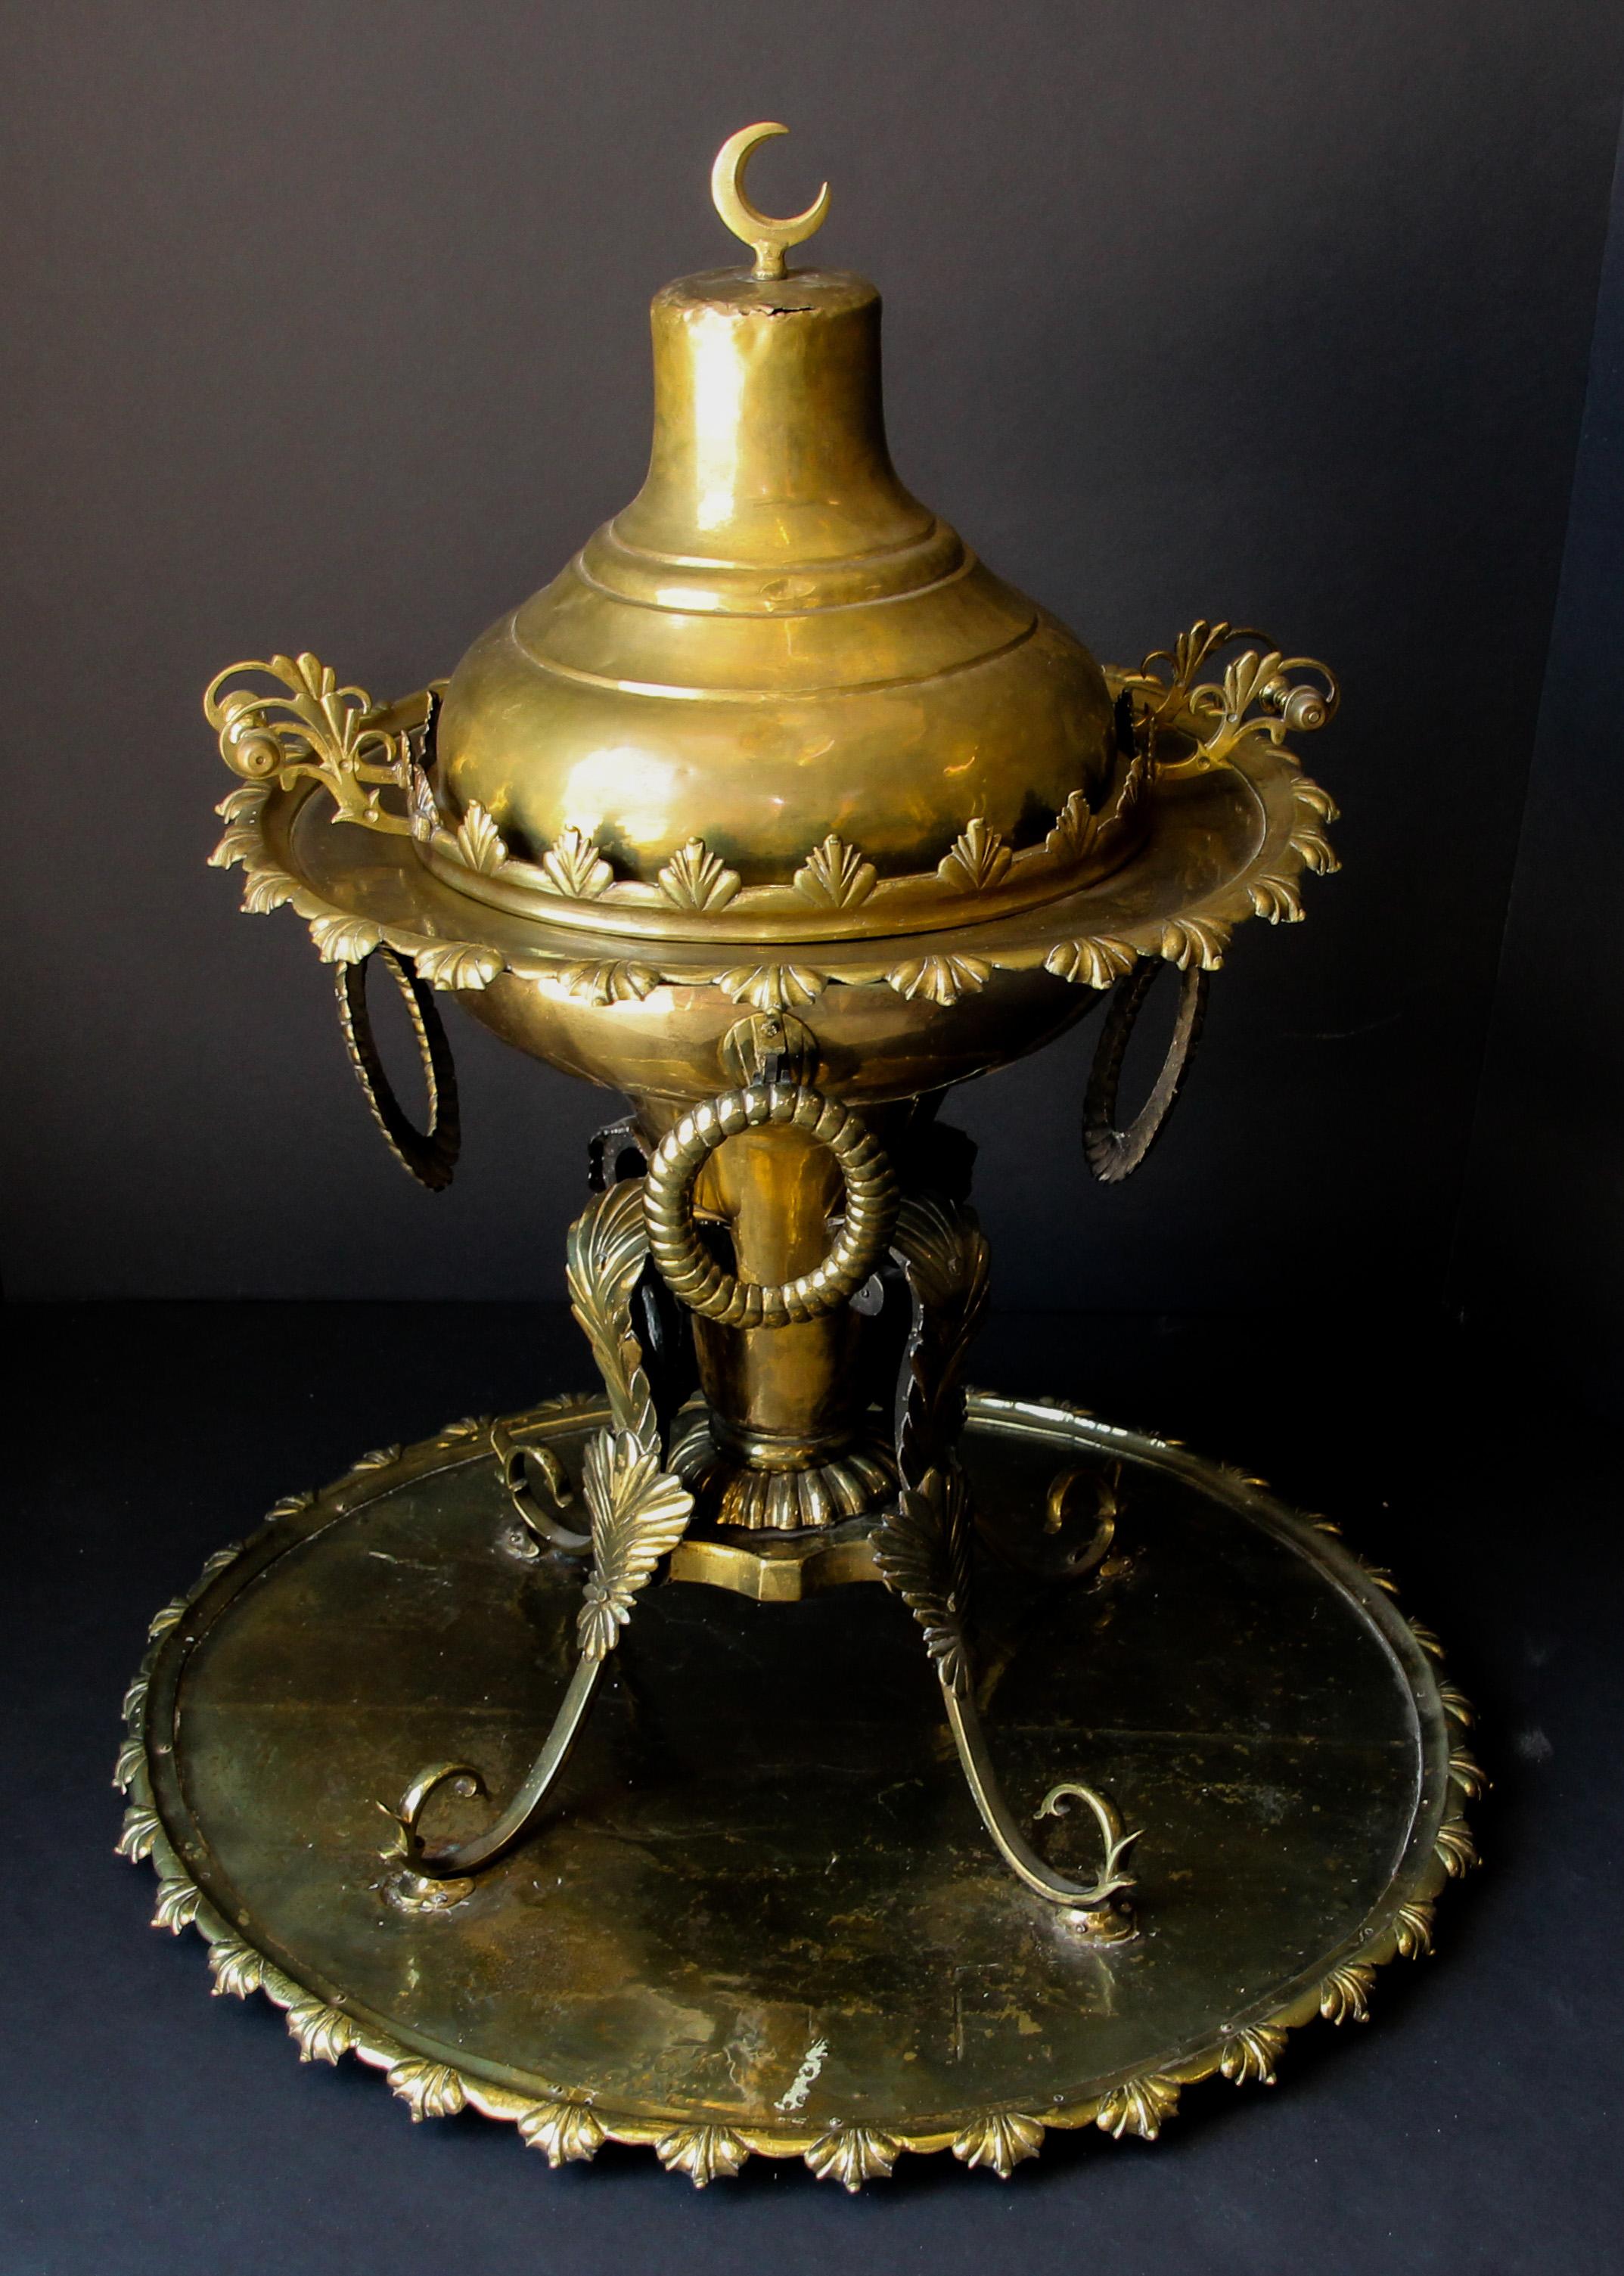 Large antique  19th century Turkish  incense burner or fire pit with pierced brass and solid brass ornamentation.
Museum quality piece footed incense censer.
Functional and beautifully adorned, rare to find complete with lid and base.
This Moorish